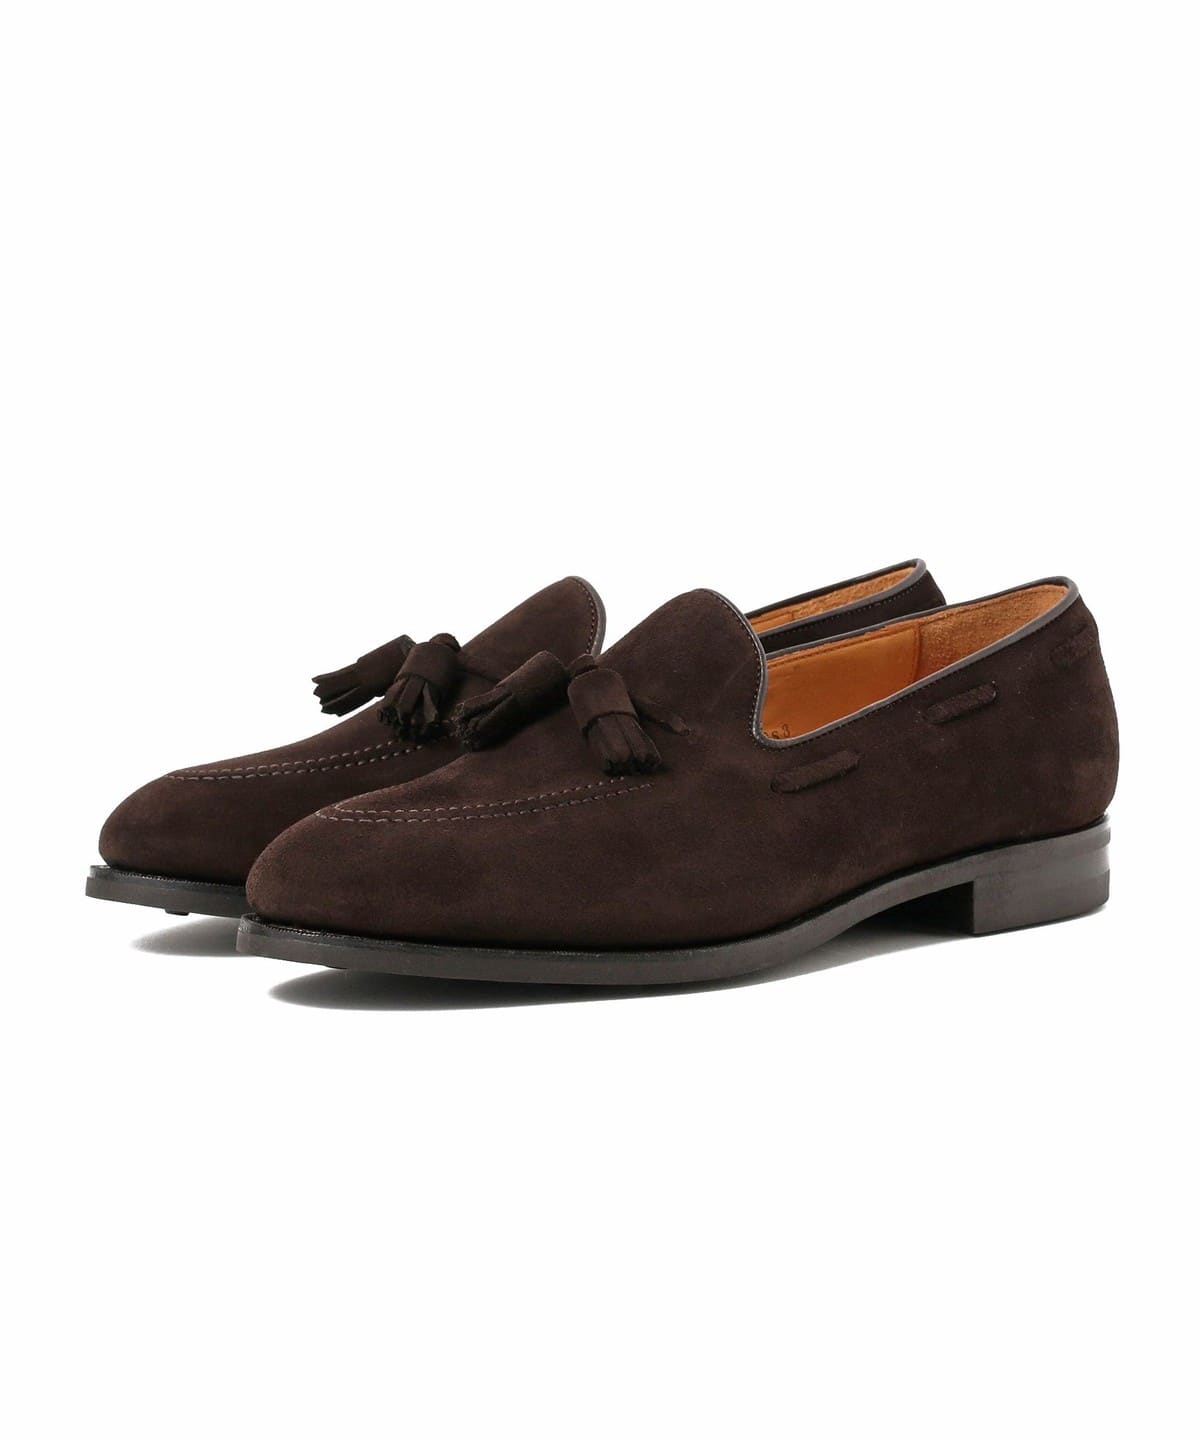 BEAMS F BEAMS BEAMS F / suede tassel loafers (shoes loafers) mail 